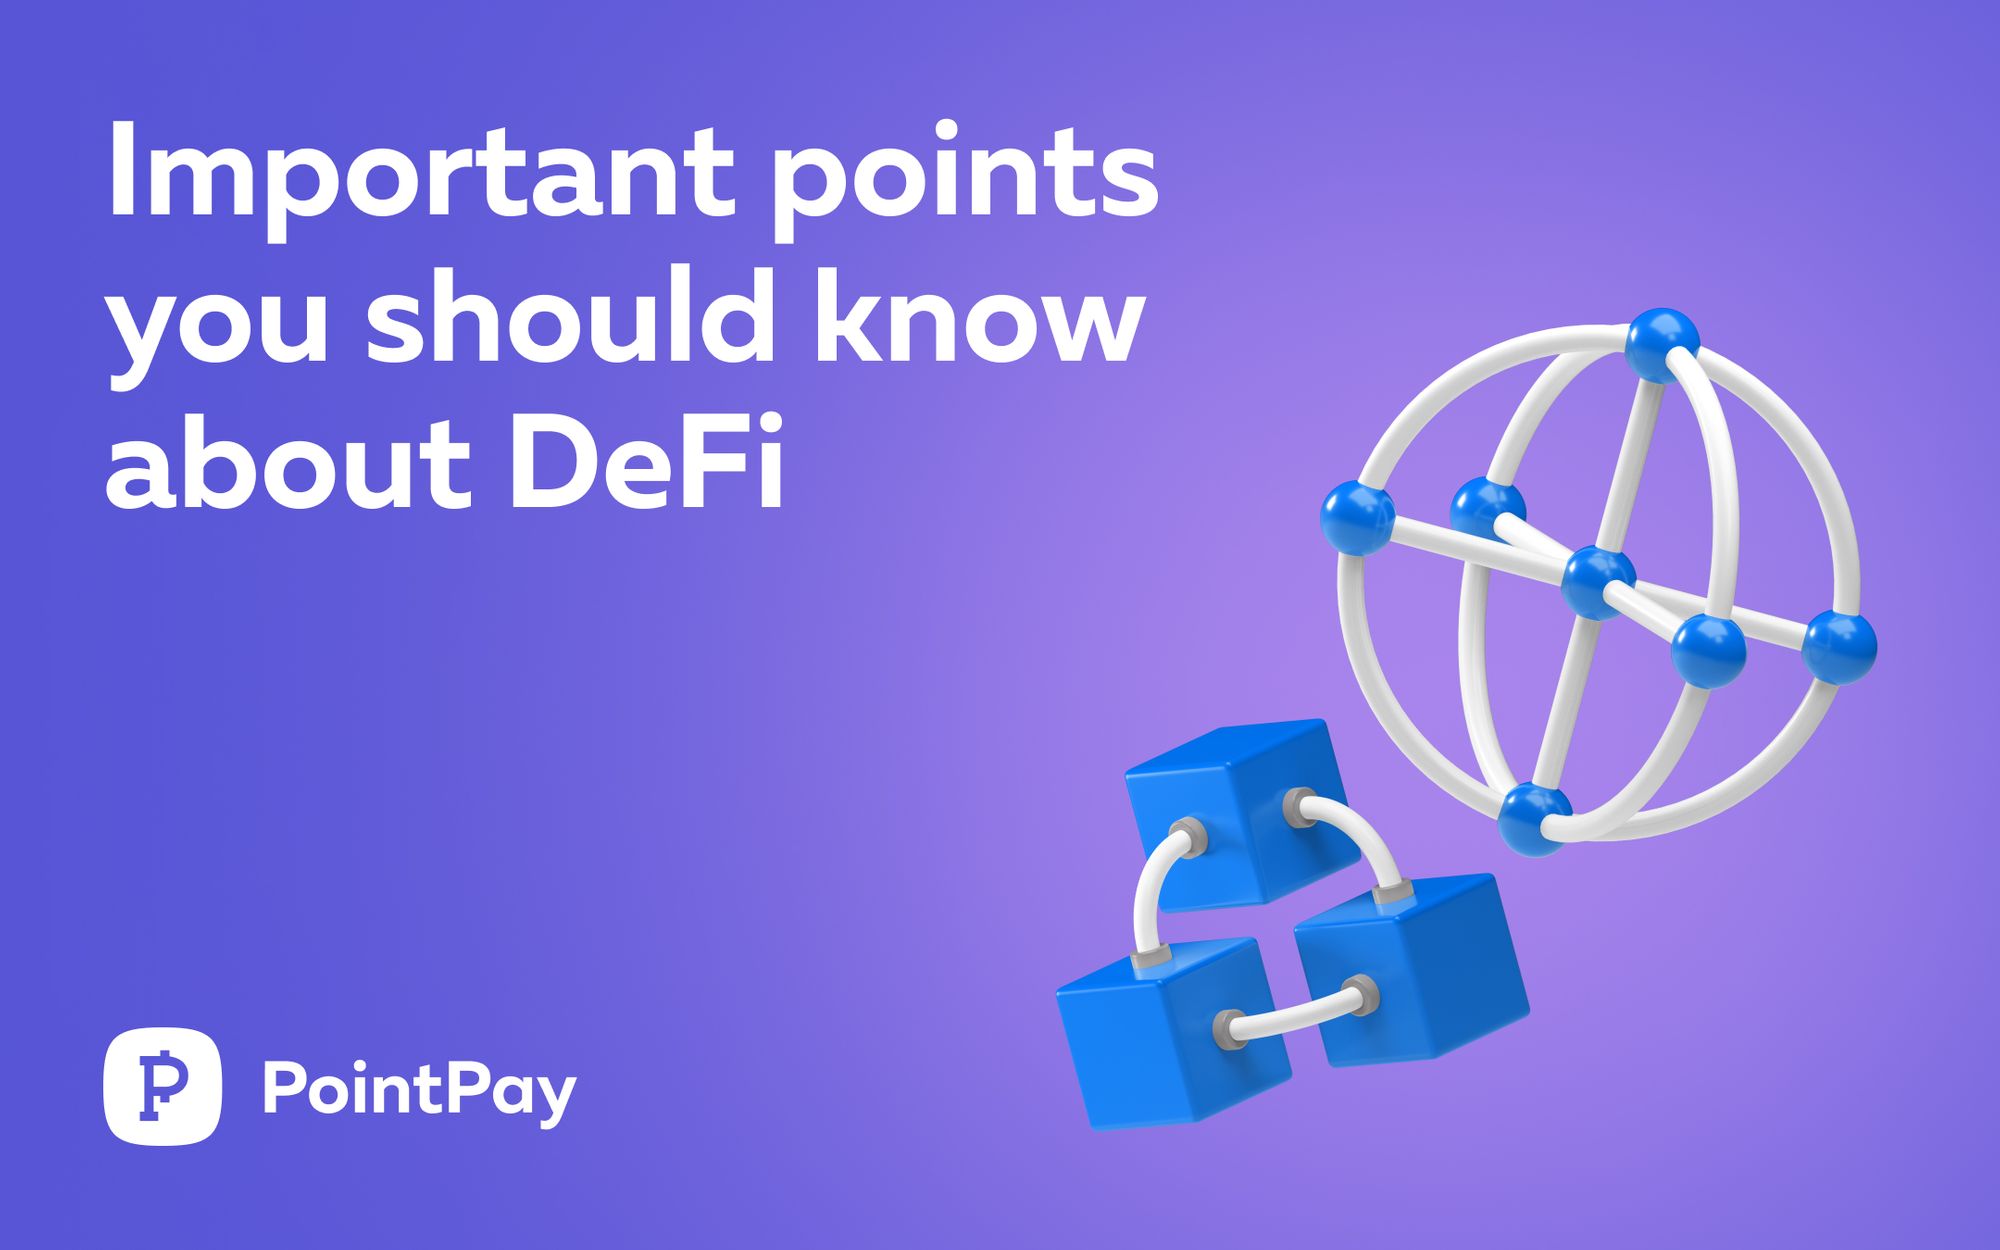 What should you know about DeFi?